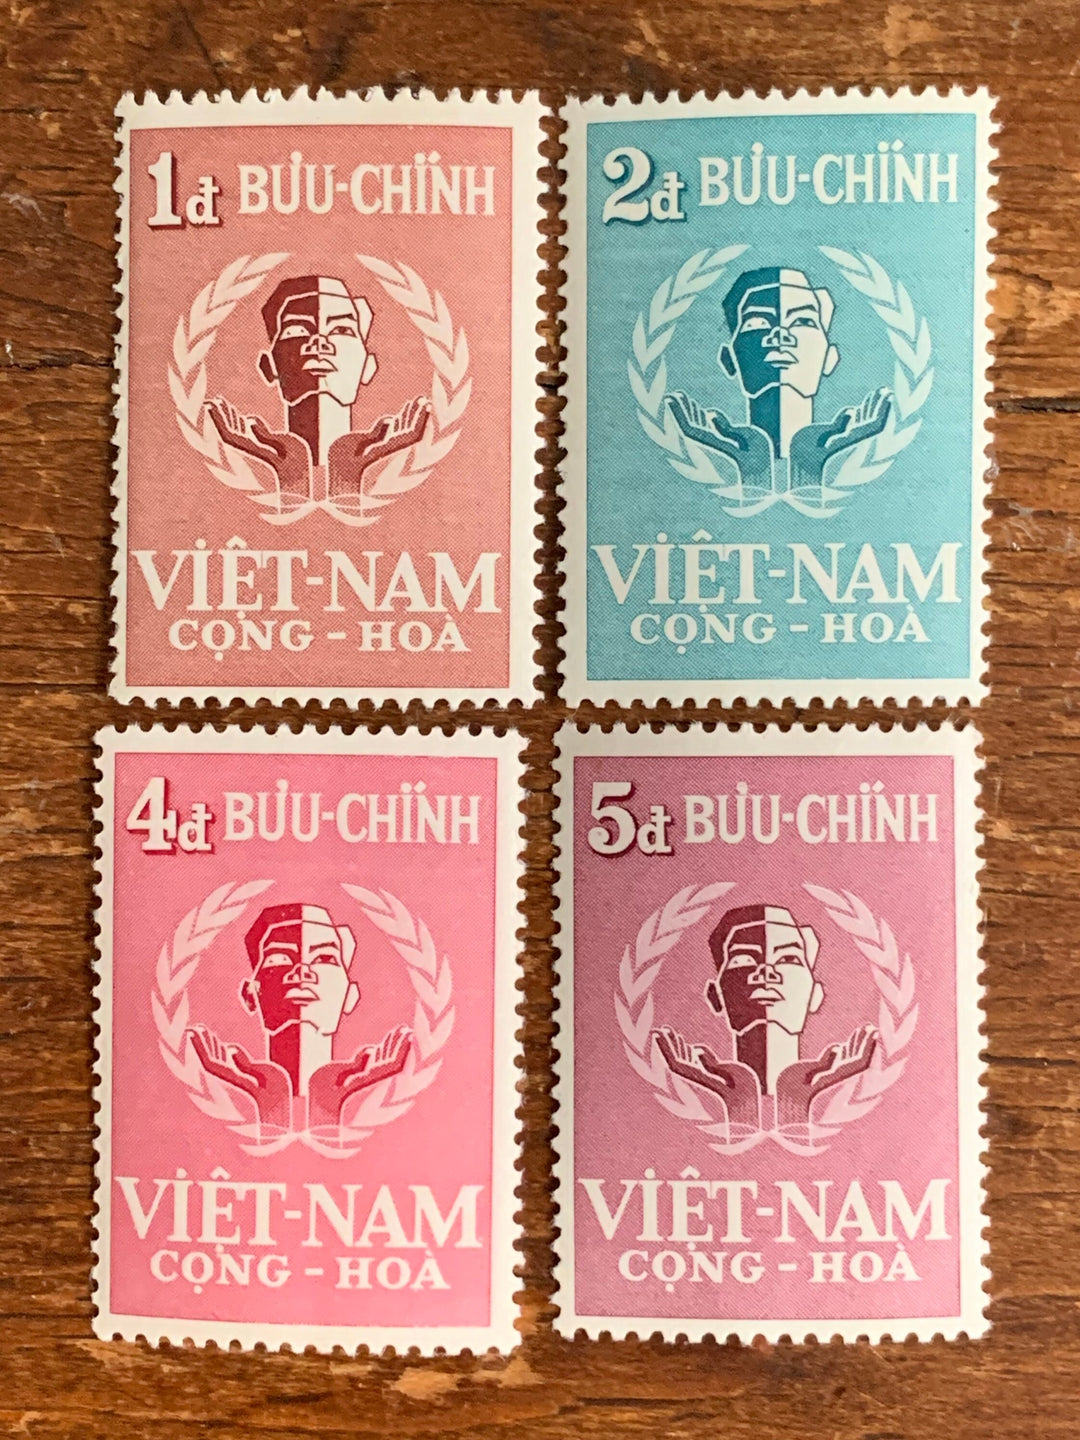 Vietnam - Original Vintage Postage Stamps- 1958 UN Day- for the collector, artist or crafter